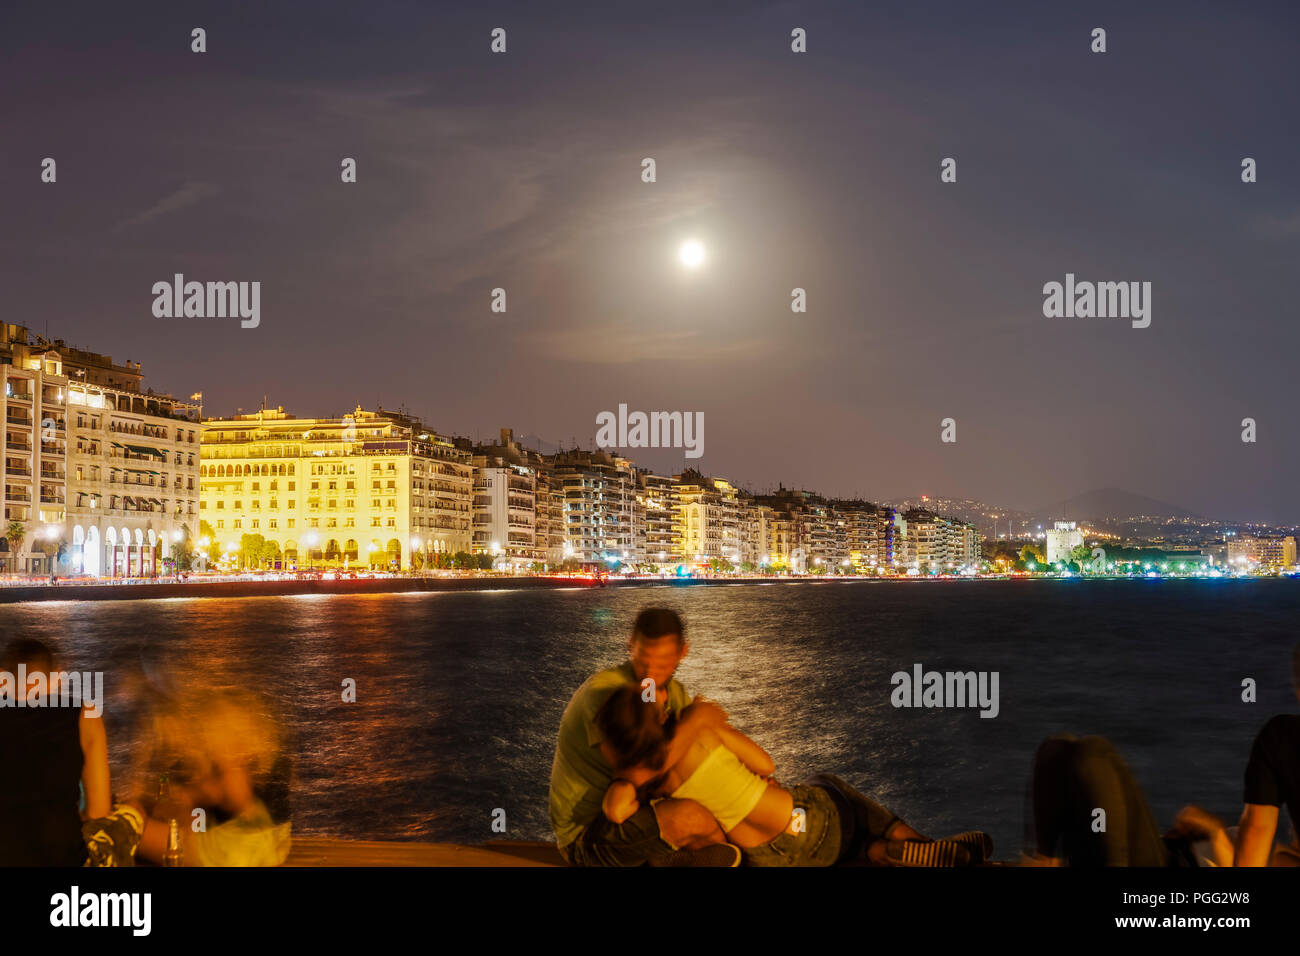 Thessaloniki, Greece. 26th Aug 2018. August 2018 full moon over Thessaloniki, Greece waterfront. Moon rising over White Tower landmark, seen from the city port. Credit: bestravelvideo/Alamy Live News Stock Photo